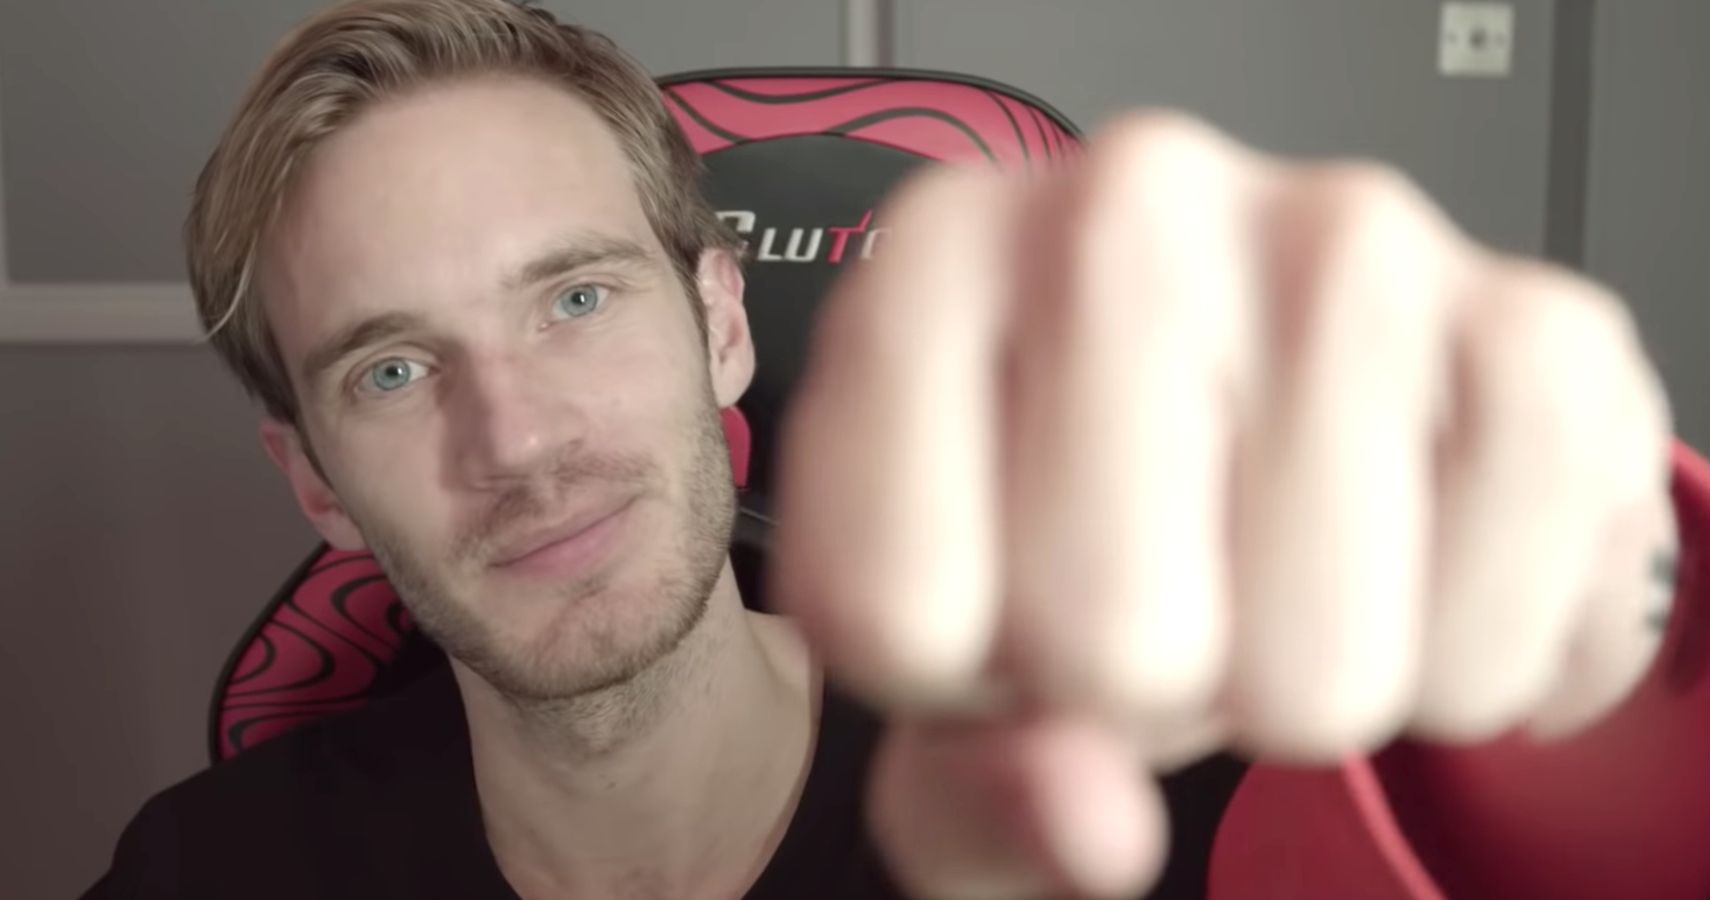 PewDiePie Hits 100M Subscribers Were All Doomed.